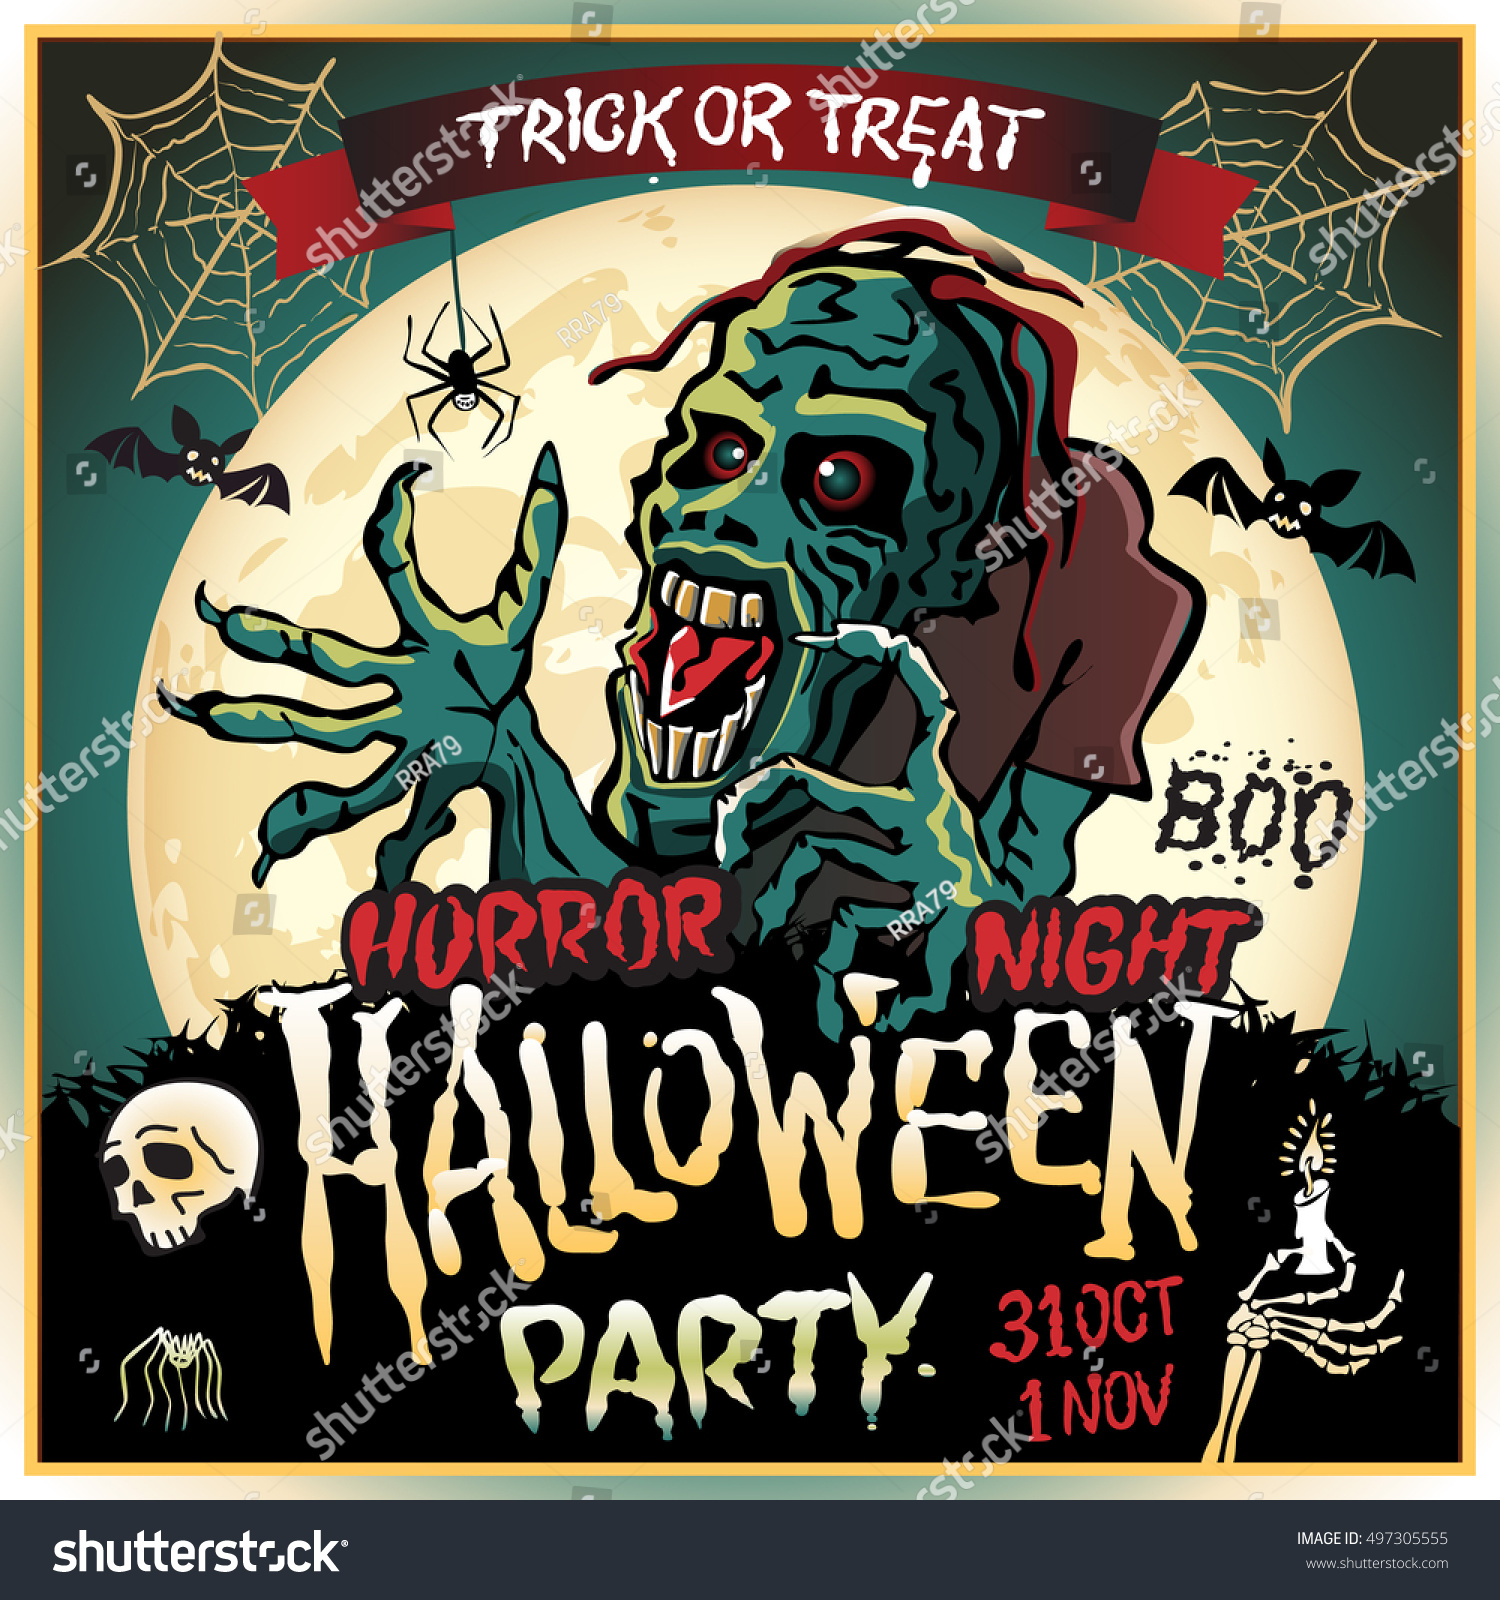 Halloween Party Horror Night Zombie Design Stock Vector Royalty Free